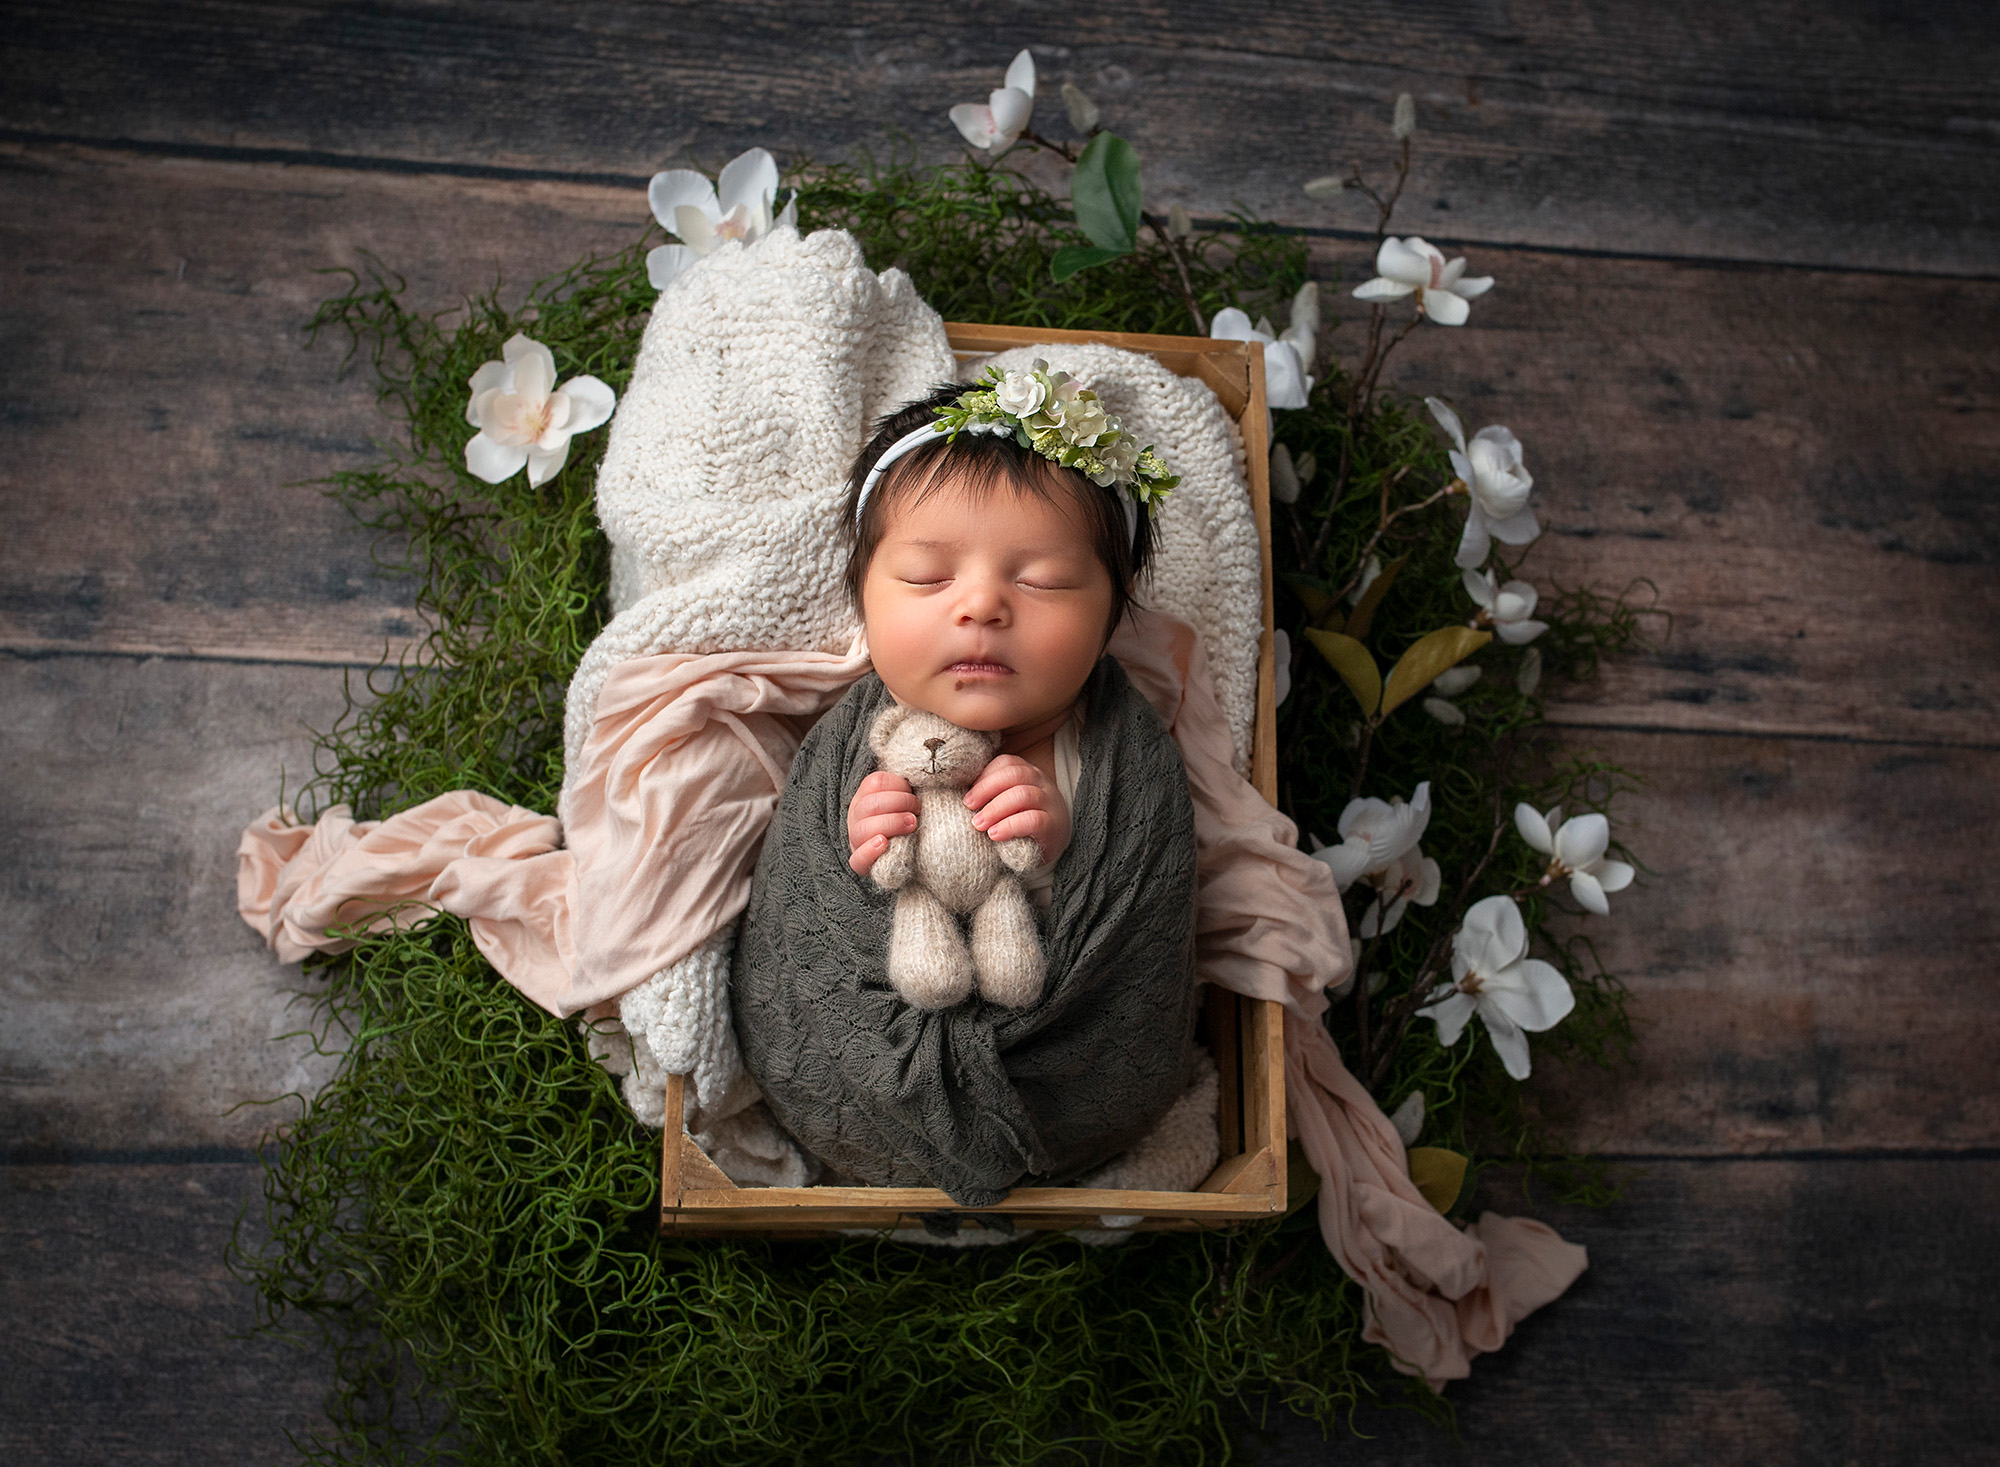 outdoorsy newborn photos newborn baby girl asleep in box surrounded by moss and white flowers holding felt teddy bear